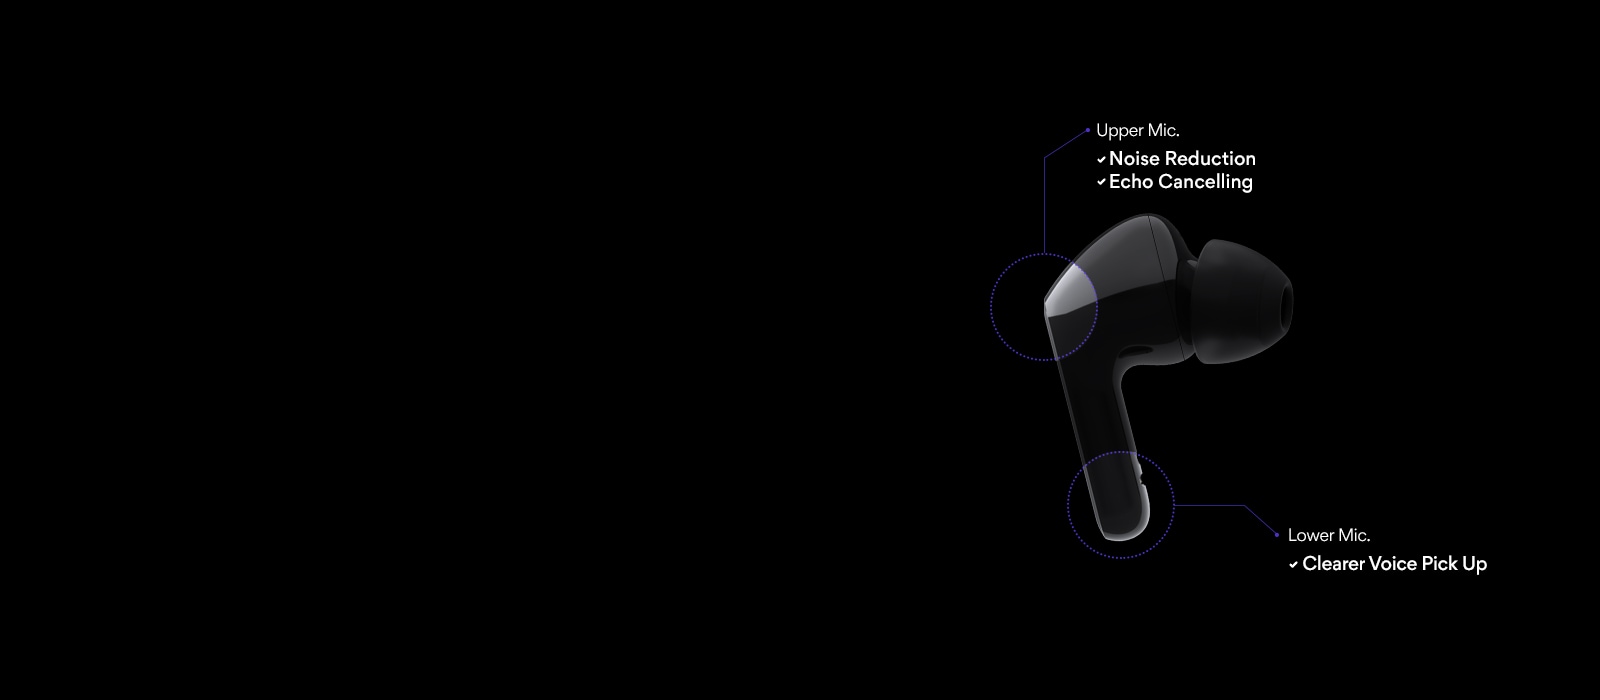 An image of a wireless earbud with diagrams highlighting the two microphones inserted in the earbud for immersive sound and noise reduction